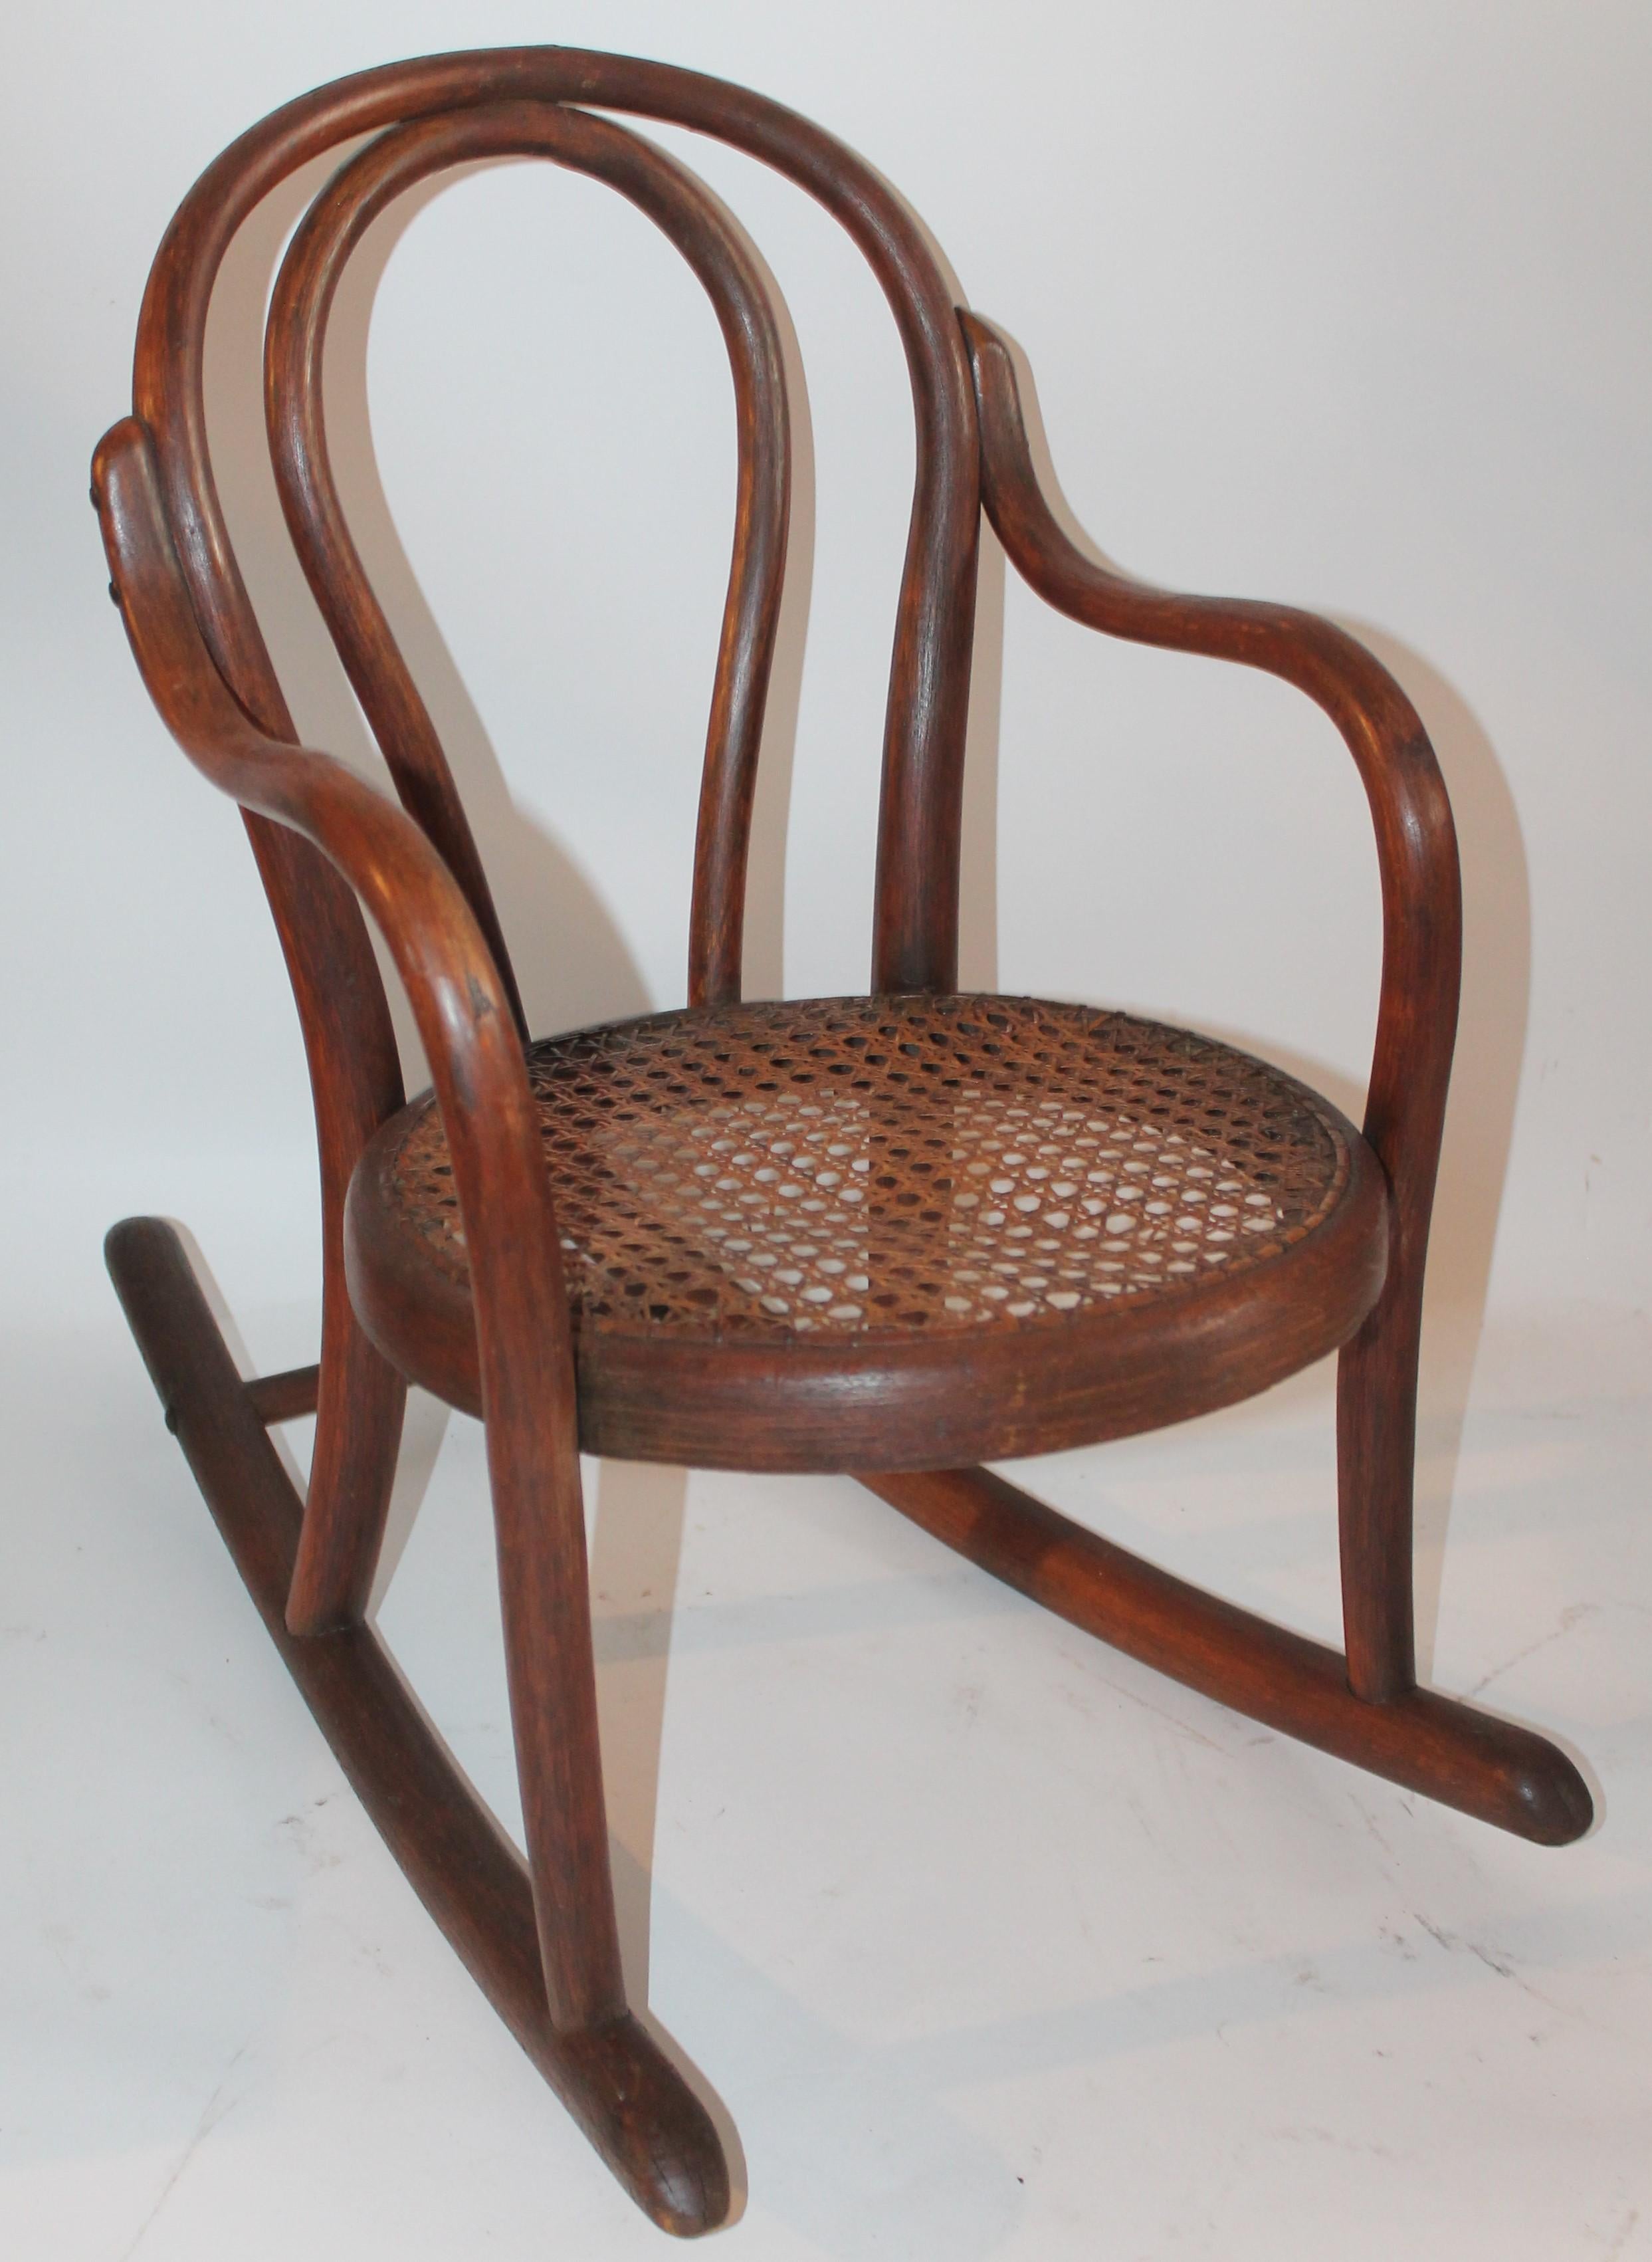 Hand-Crafted Bentwood Rocker and Chair with Cane Seats, 19th Century For Sale